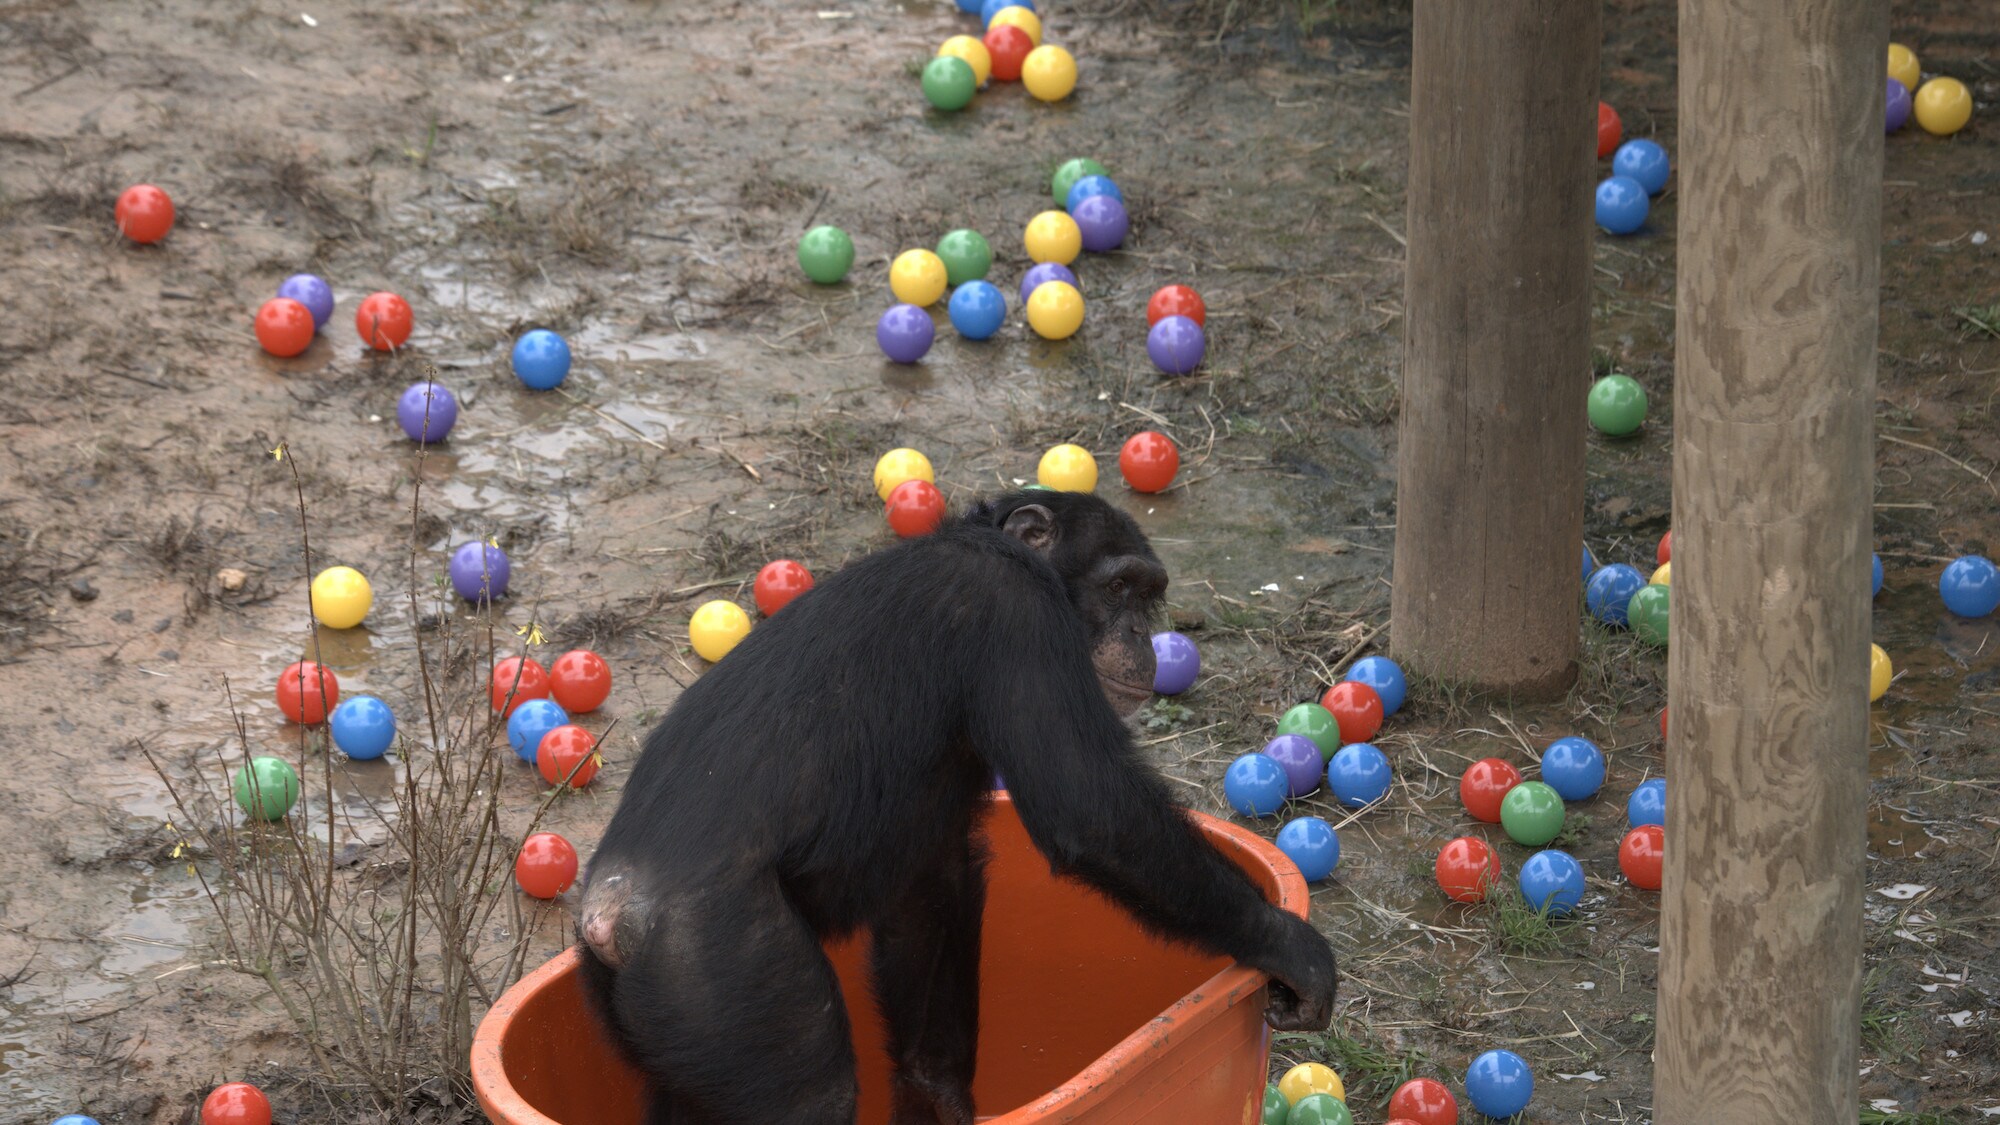 Riley is in the empty ball pit, all the balls are all over the ground after he’s emptied the pit. Slim’s group. (National Geographic/Virginia Quinn)